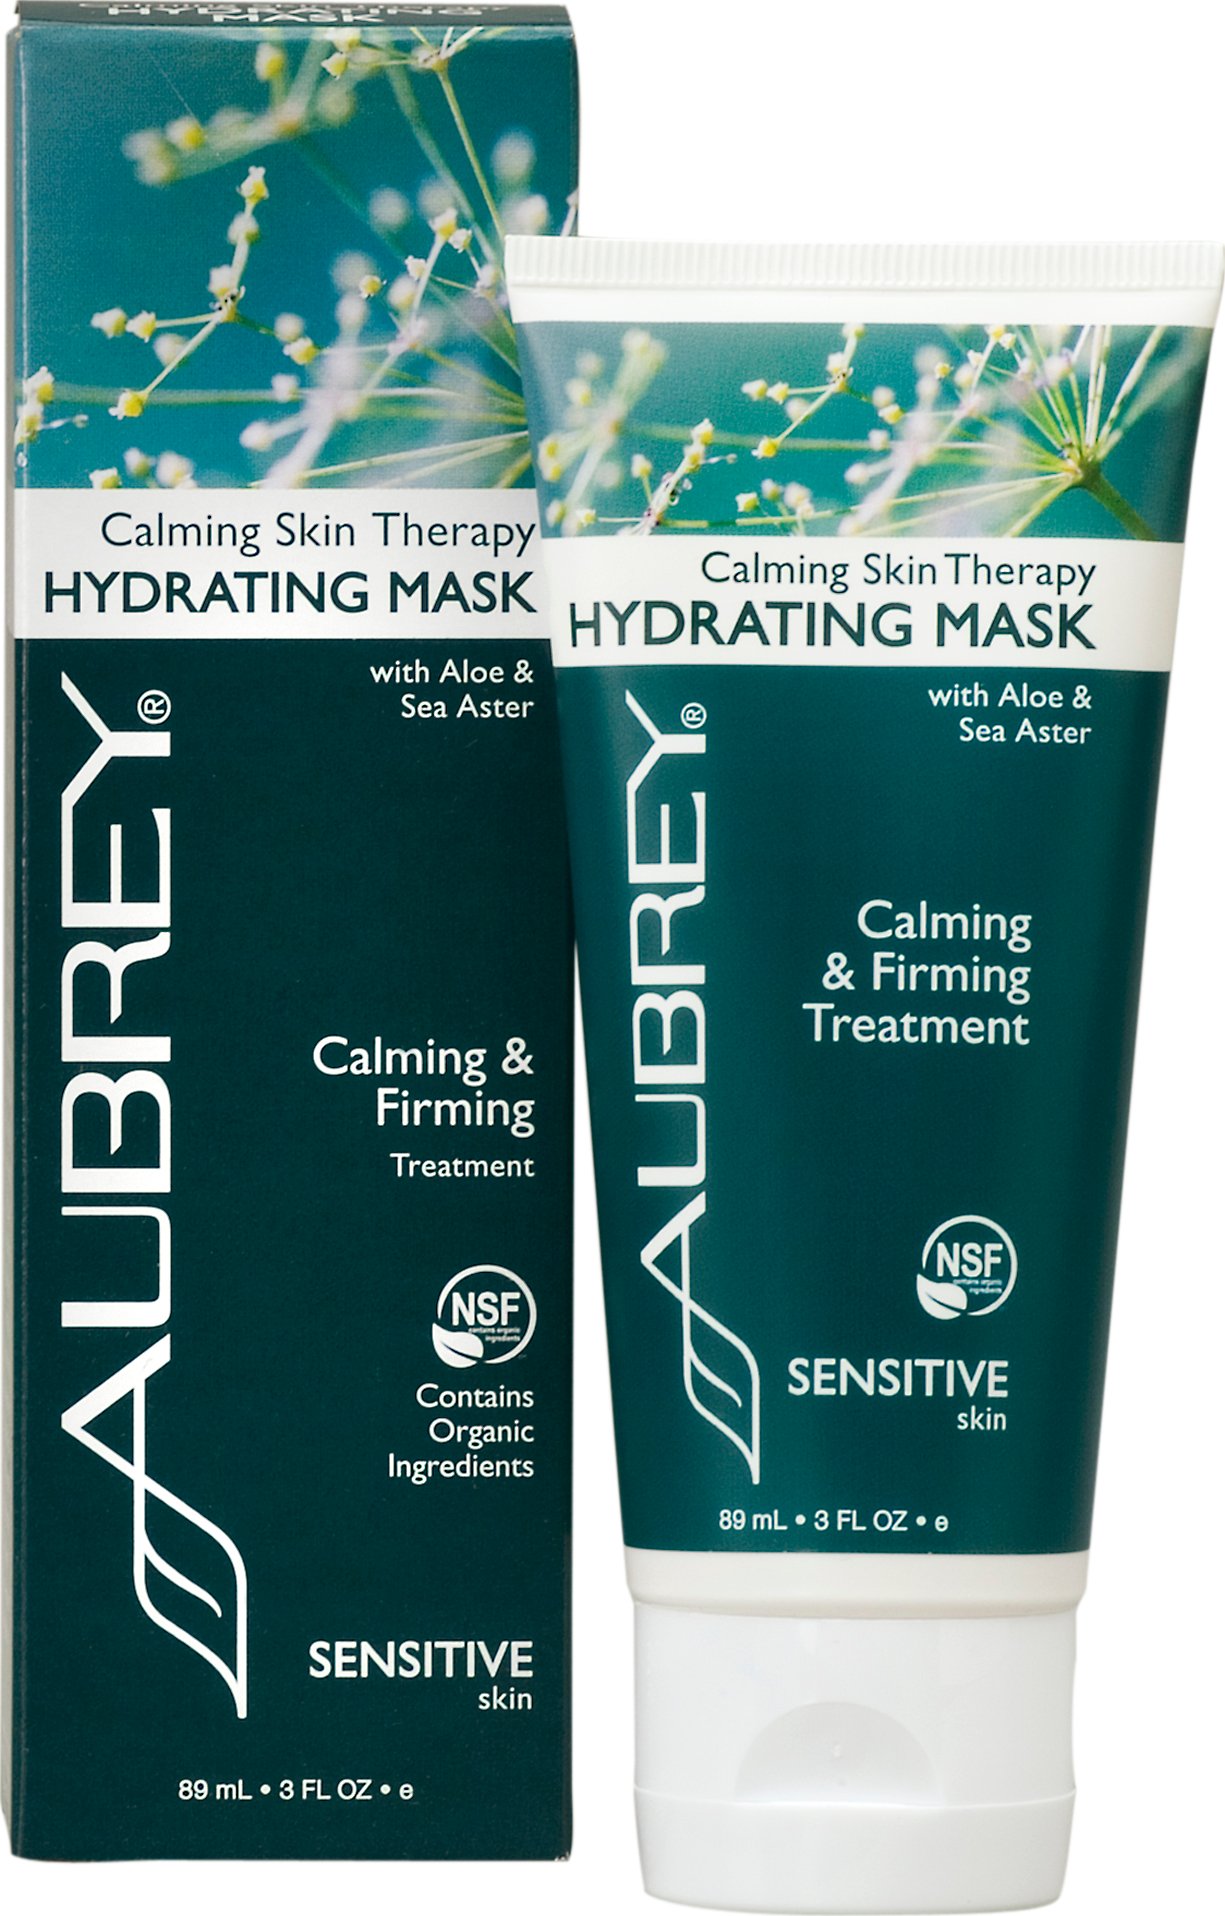 Aubrey Calming Skin Therapy Hydrating Mask